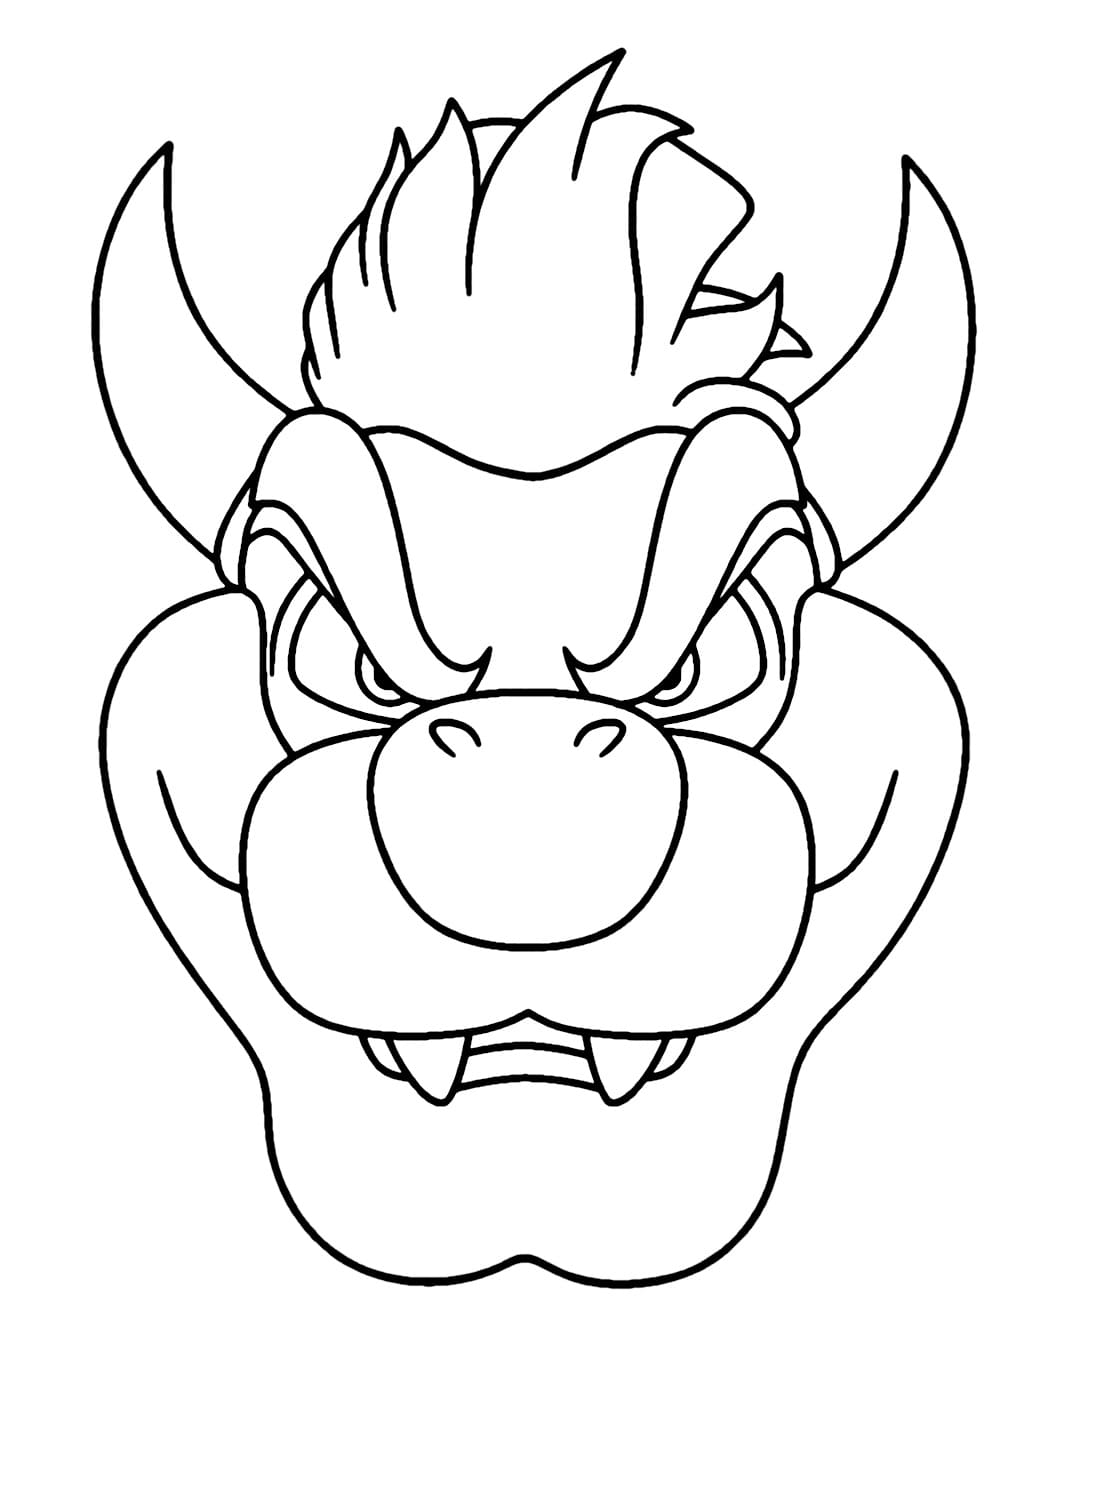 dry bowser coloring pages